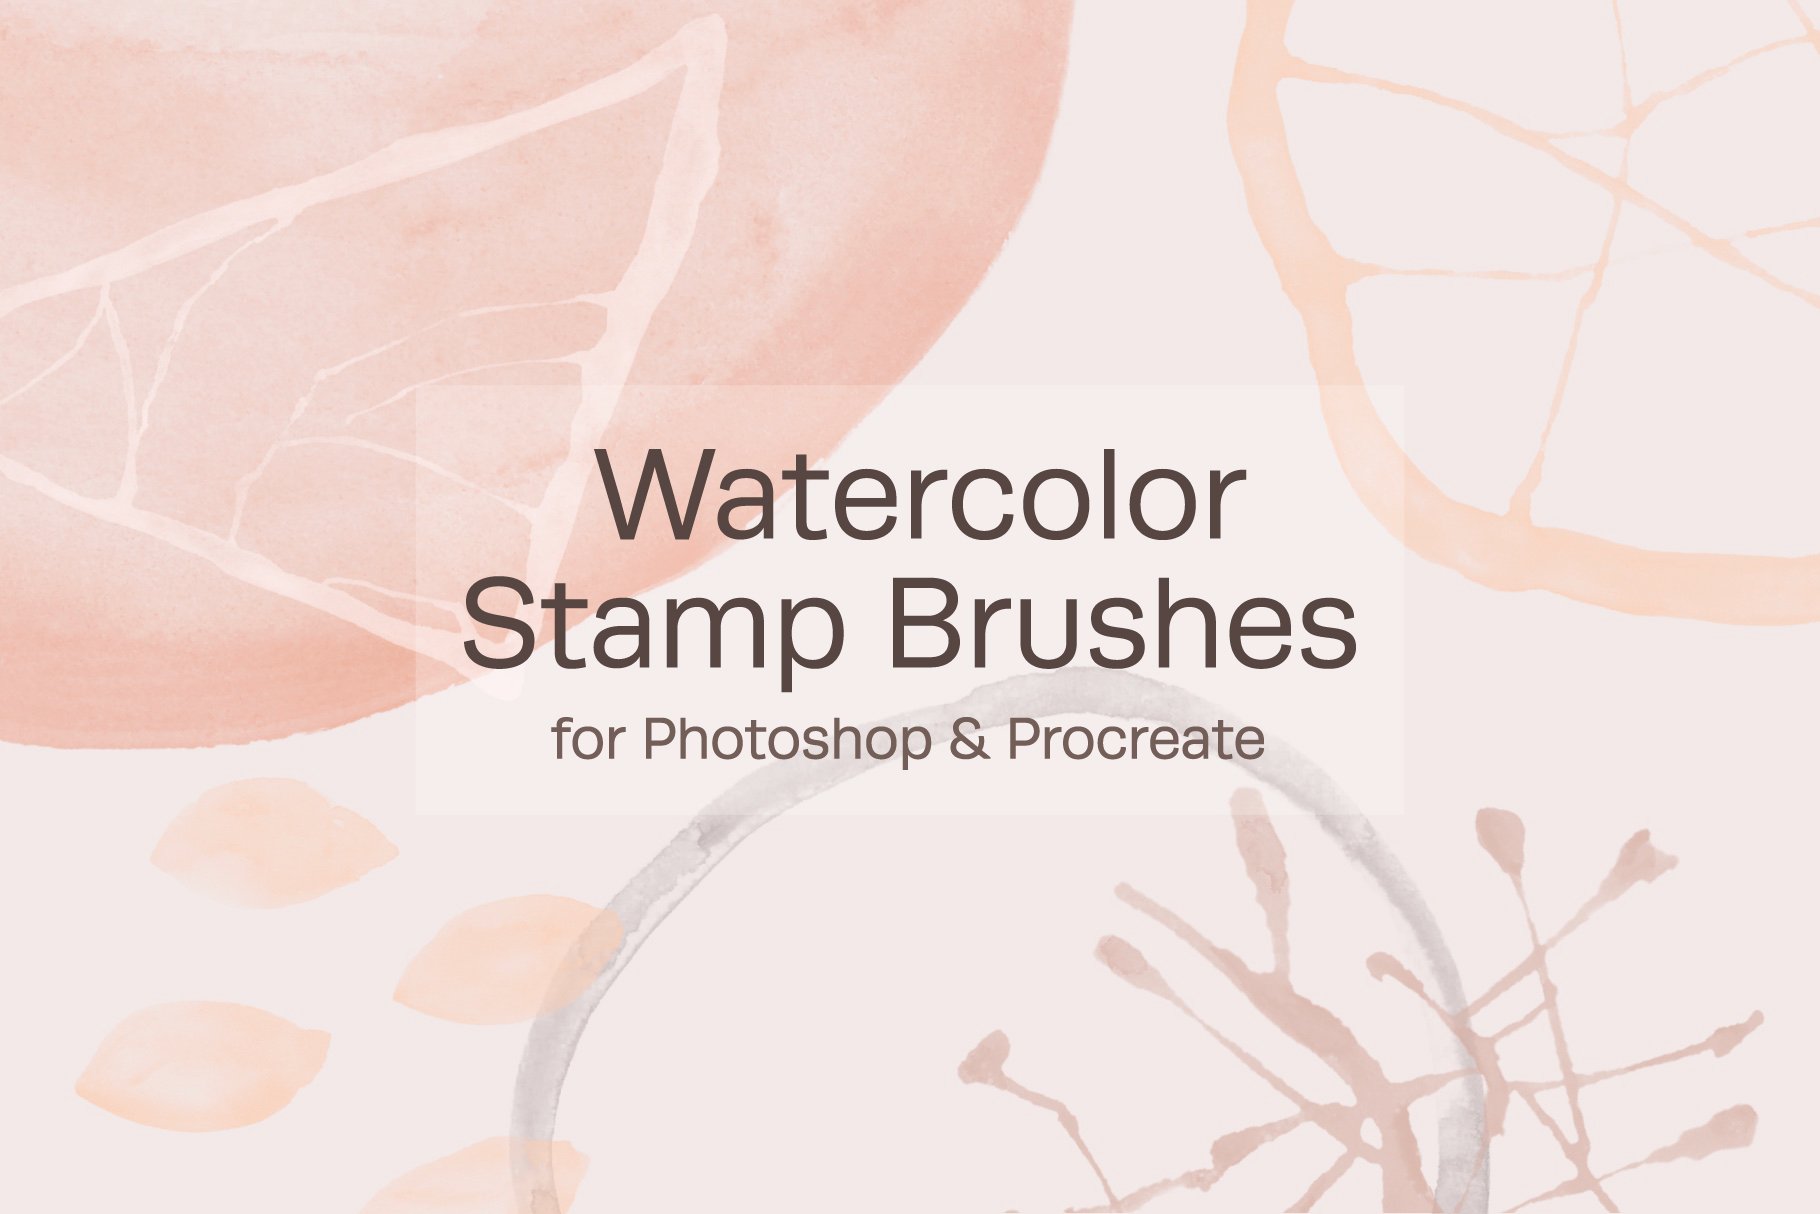 Watercolor Procreate Stamp Brushescover image.